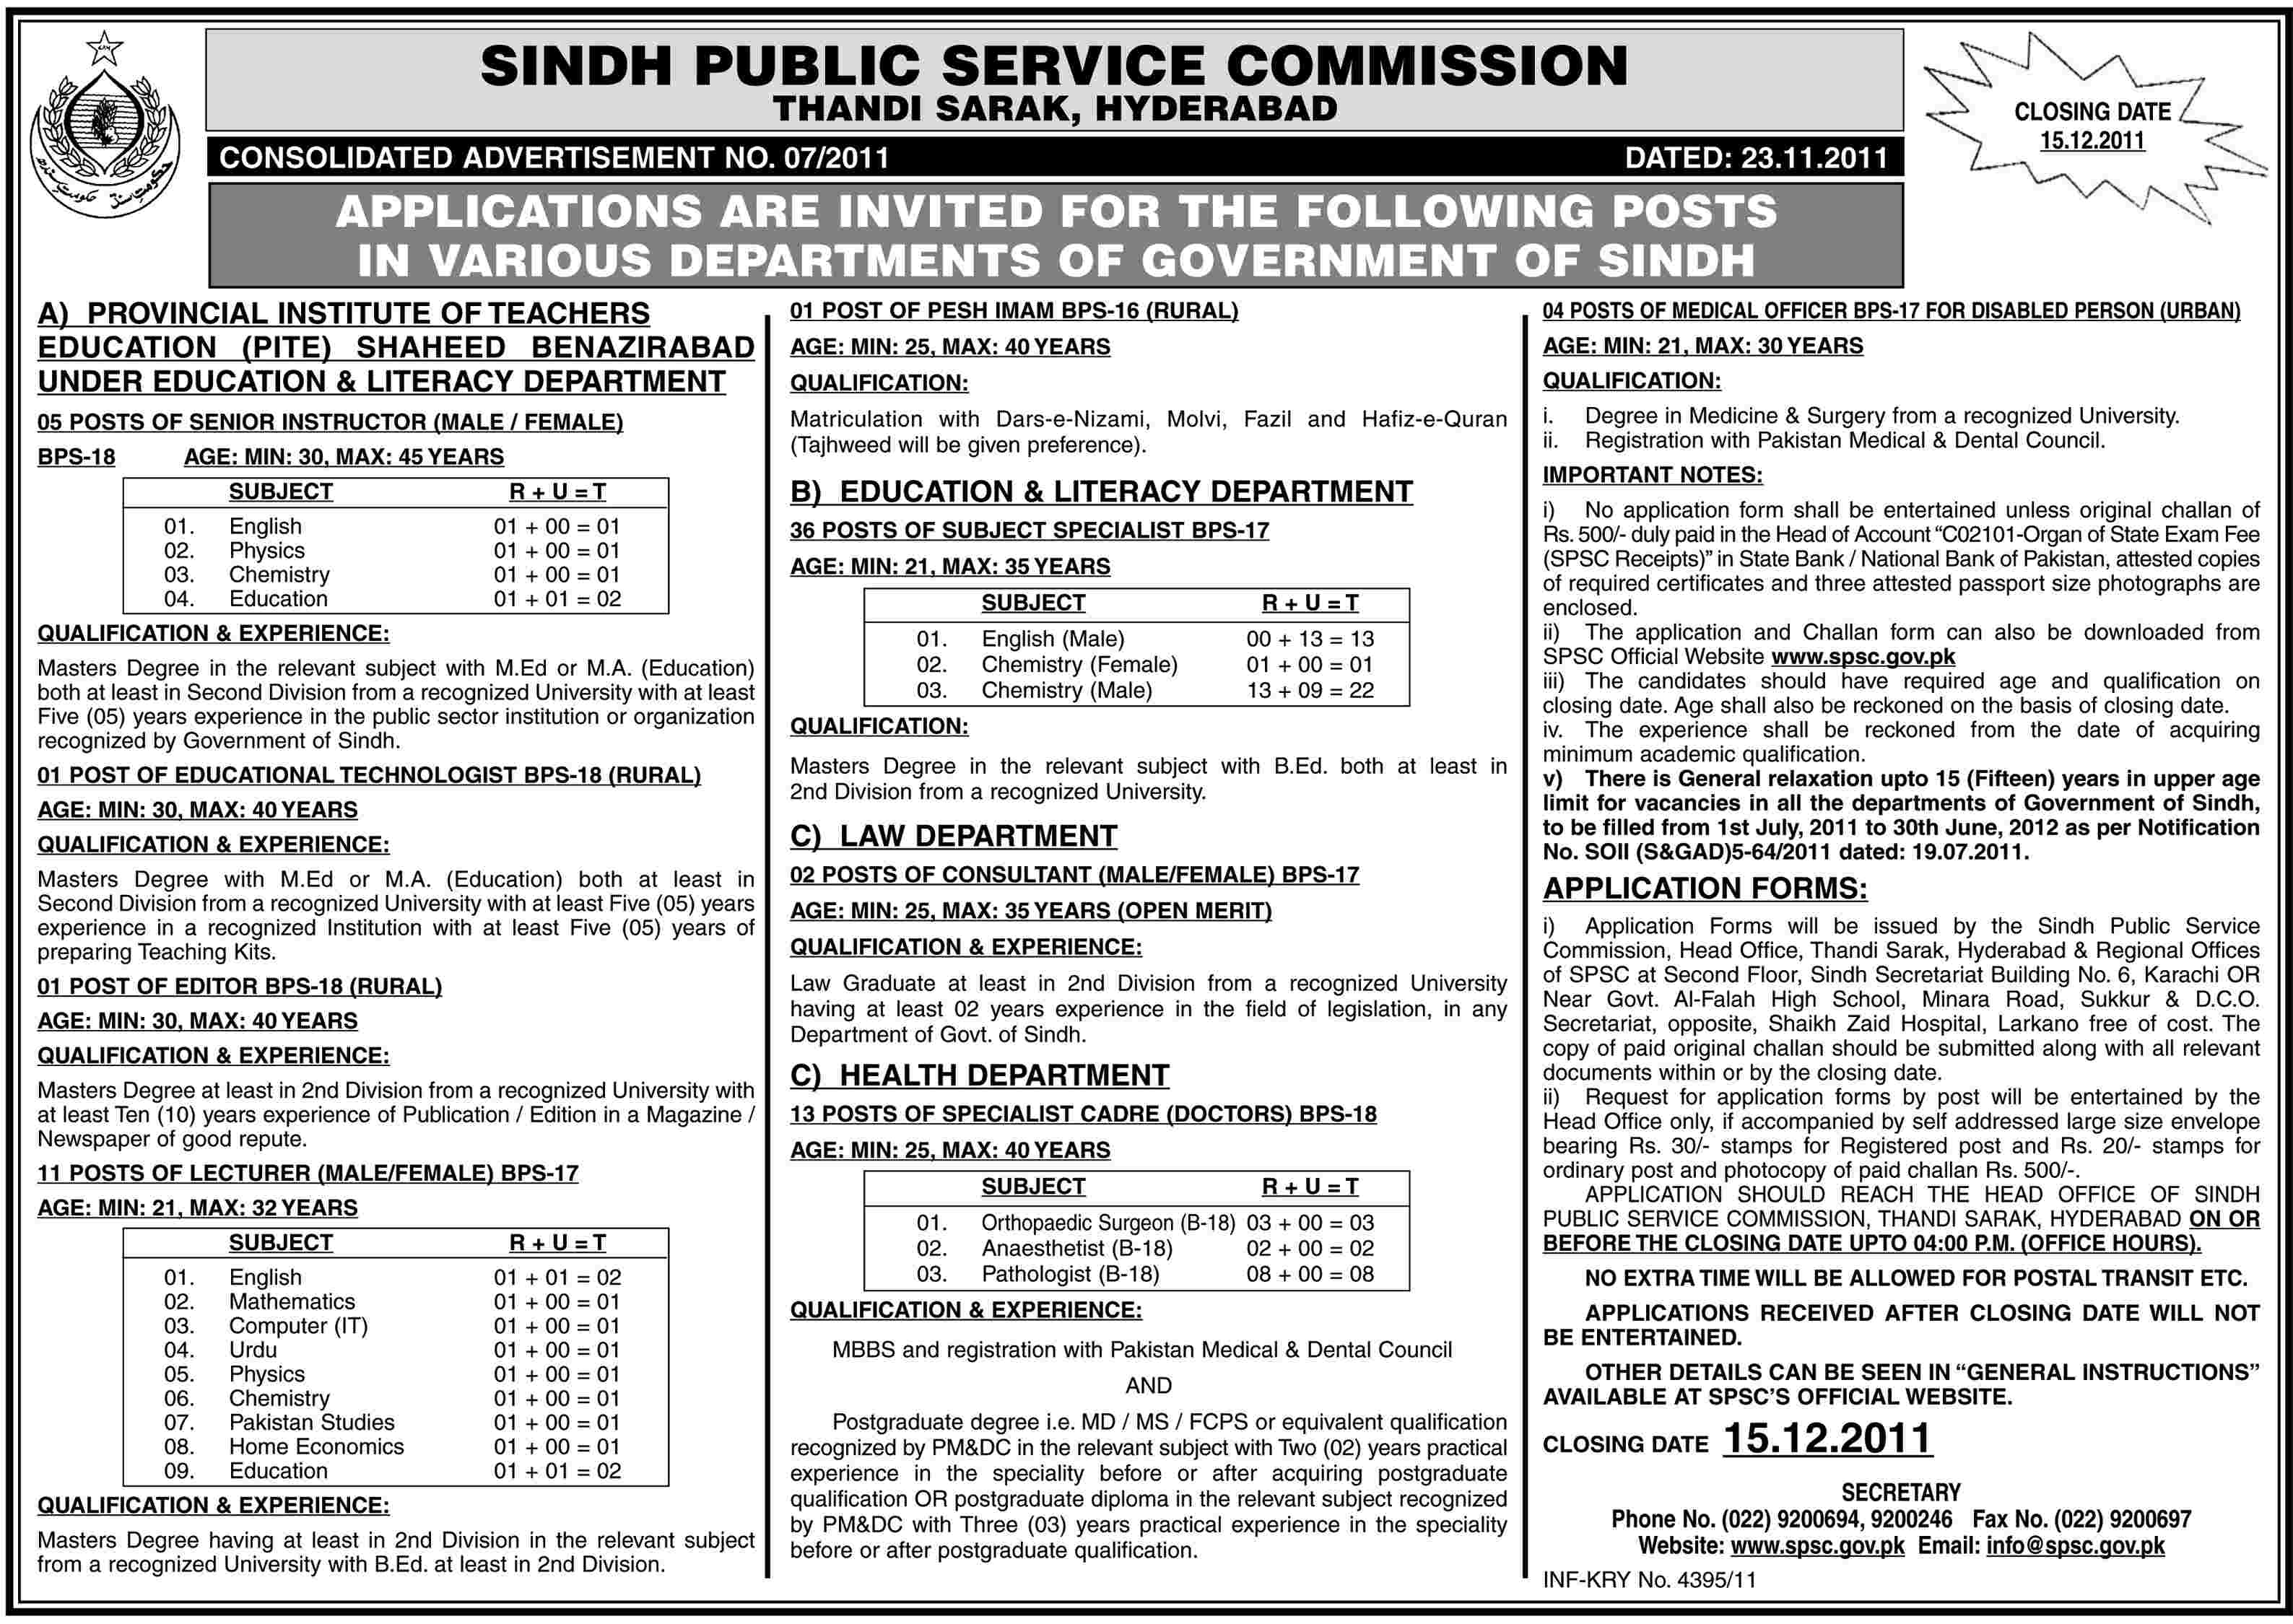 Sindh Public Service Commission Hyderabad Jobs Opportunities